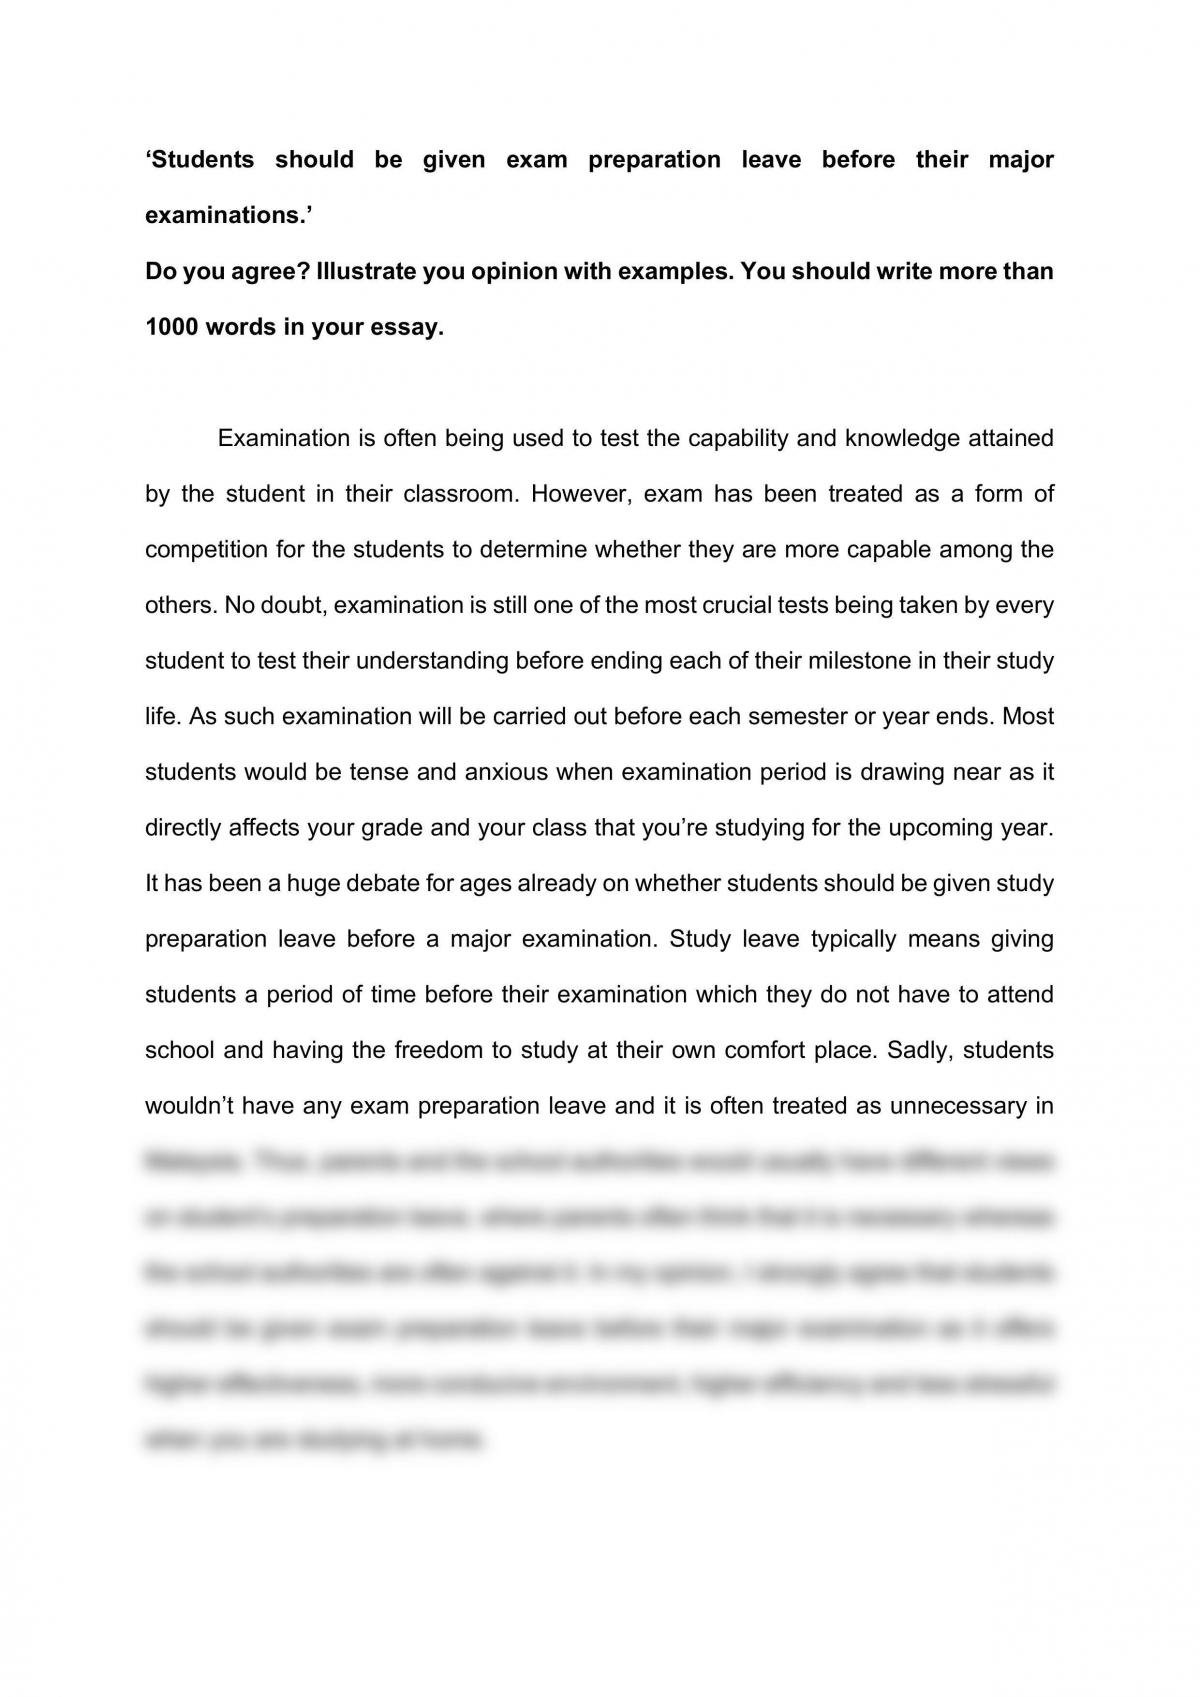 argumentative essay examples for university students